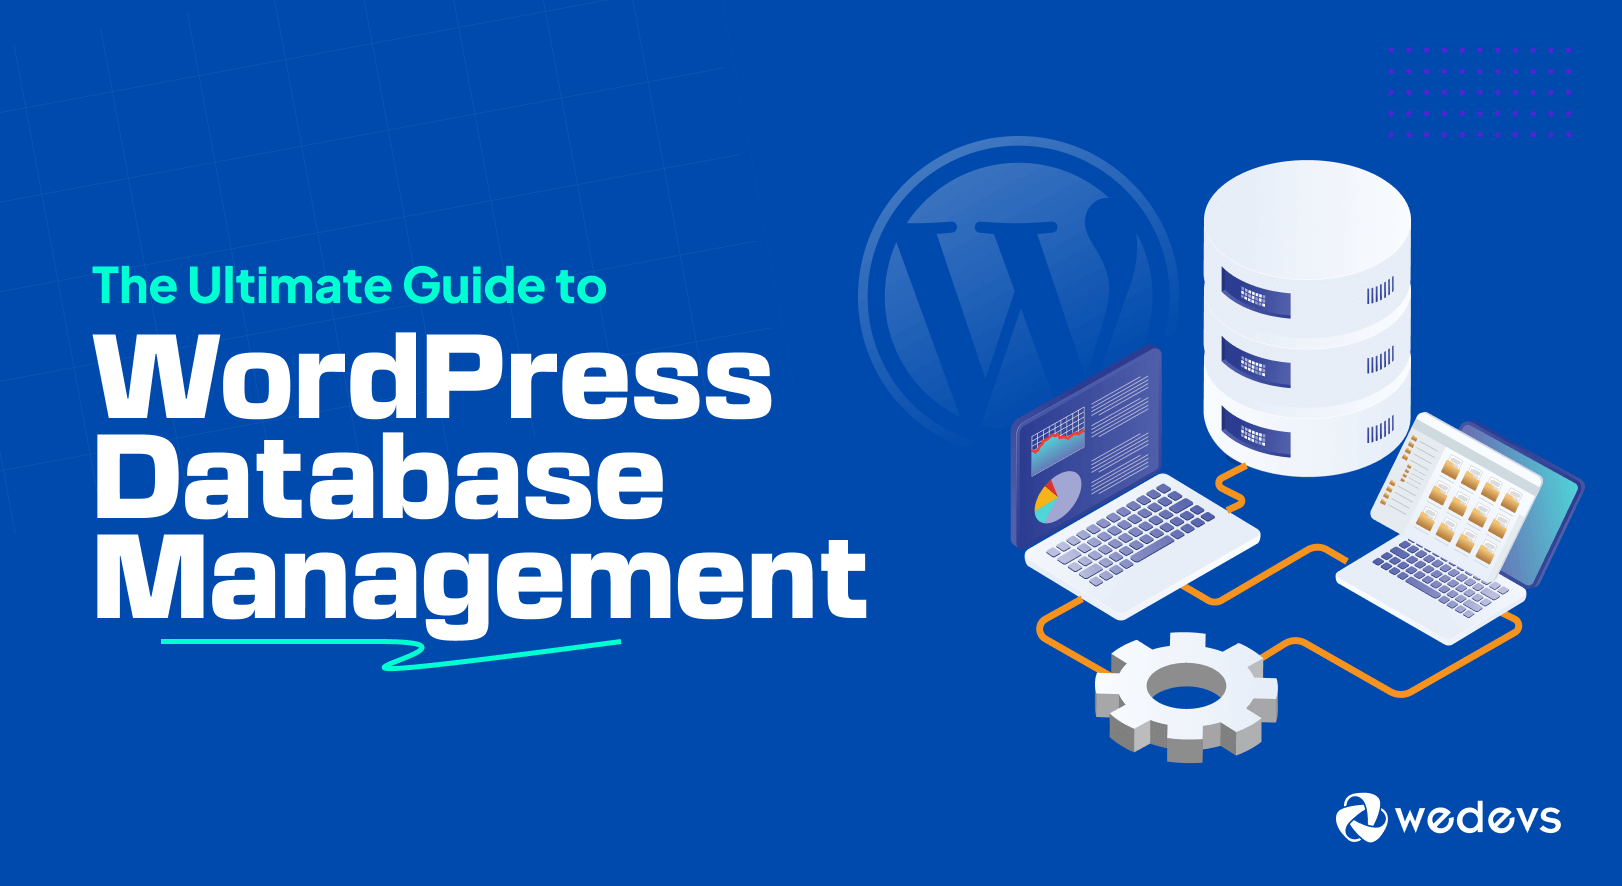 The Ultimate Guide to WordPress Database Management